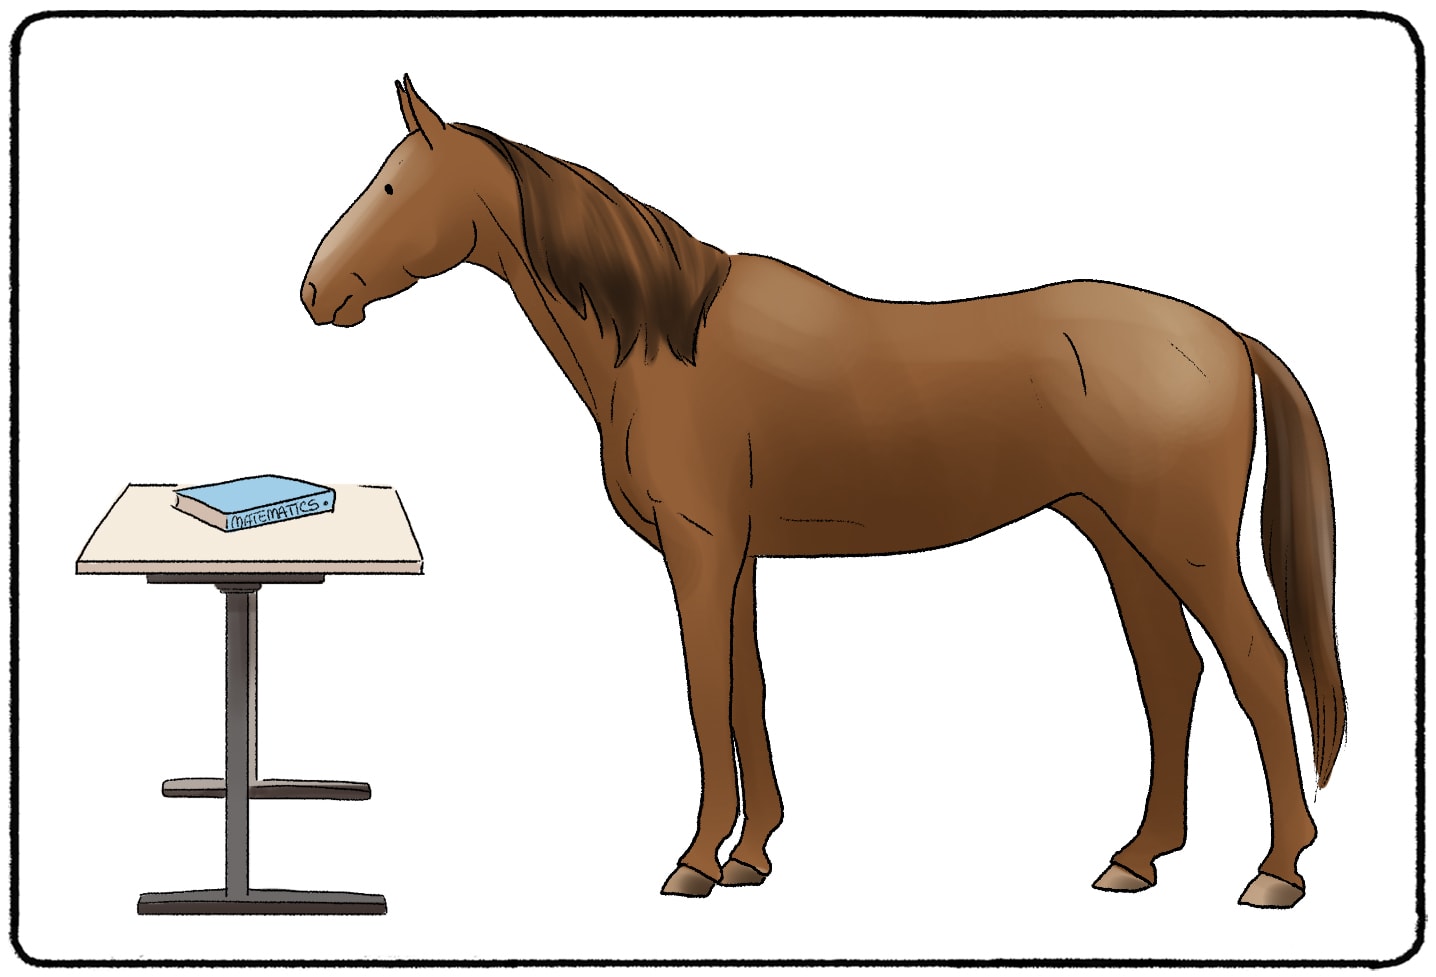 horse being used in the Clever Hans Effect